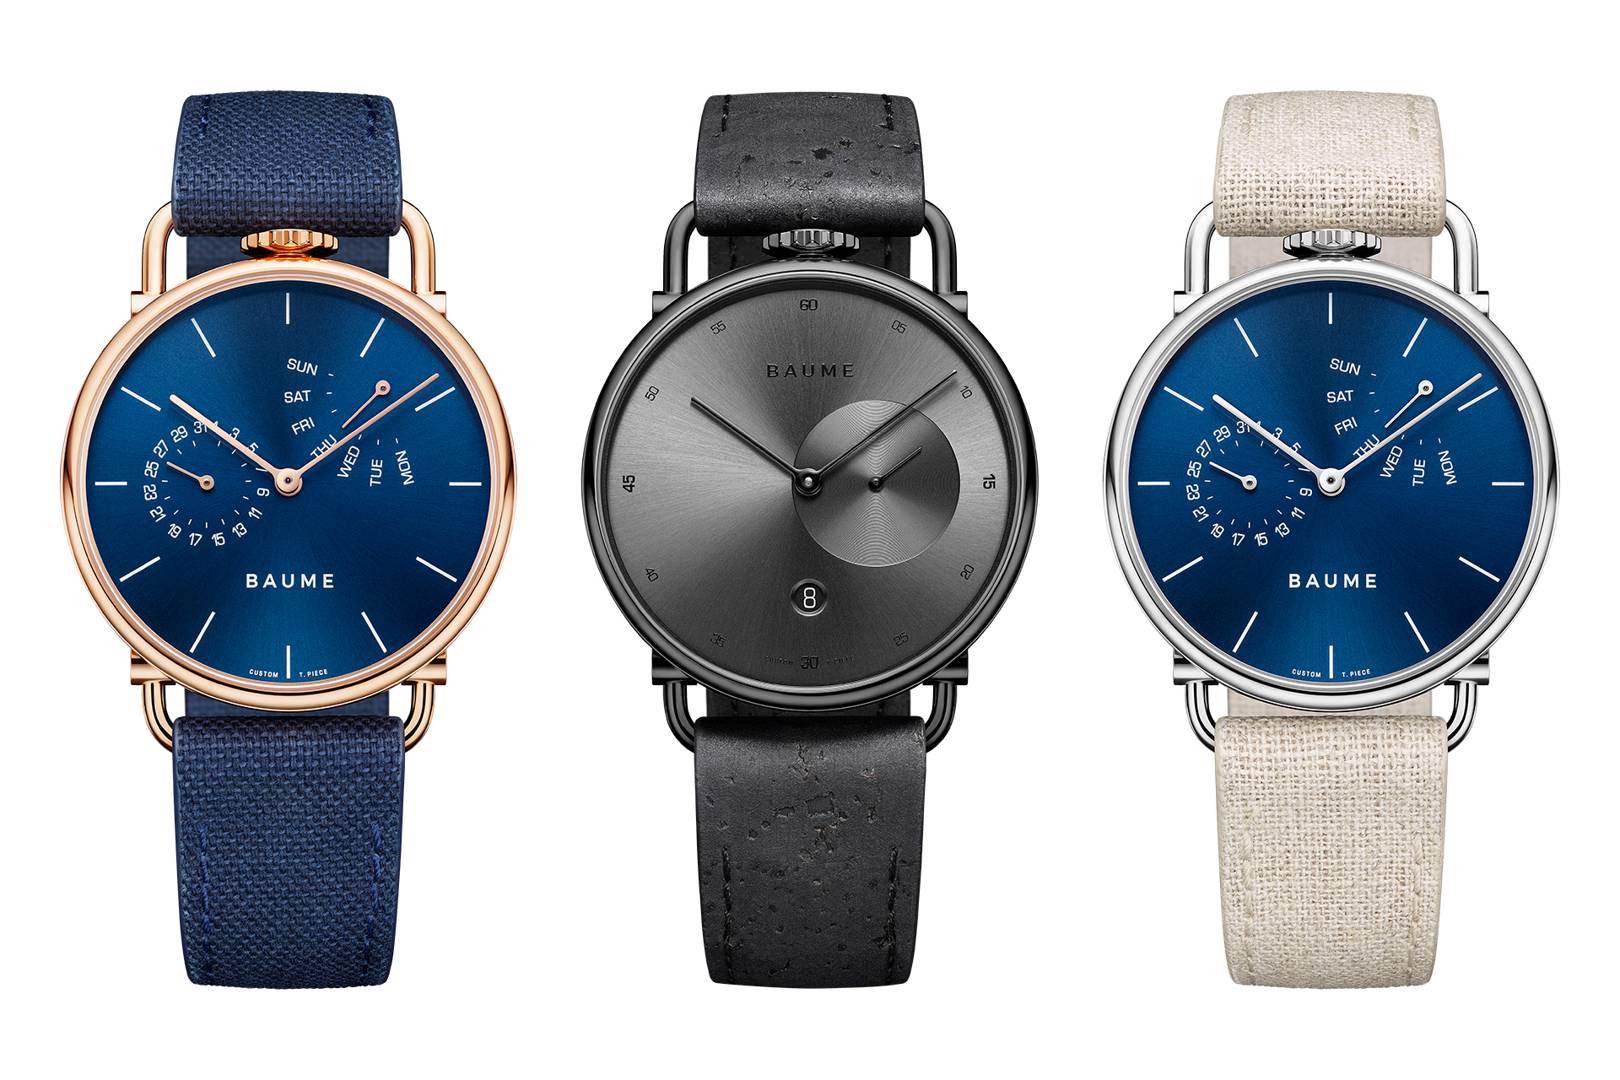 Richemont Group just launched Baume, the NIKEiD of entry-level watches